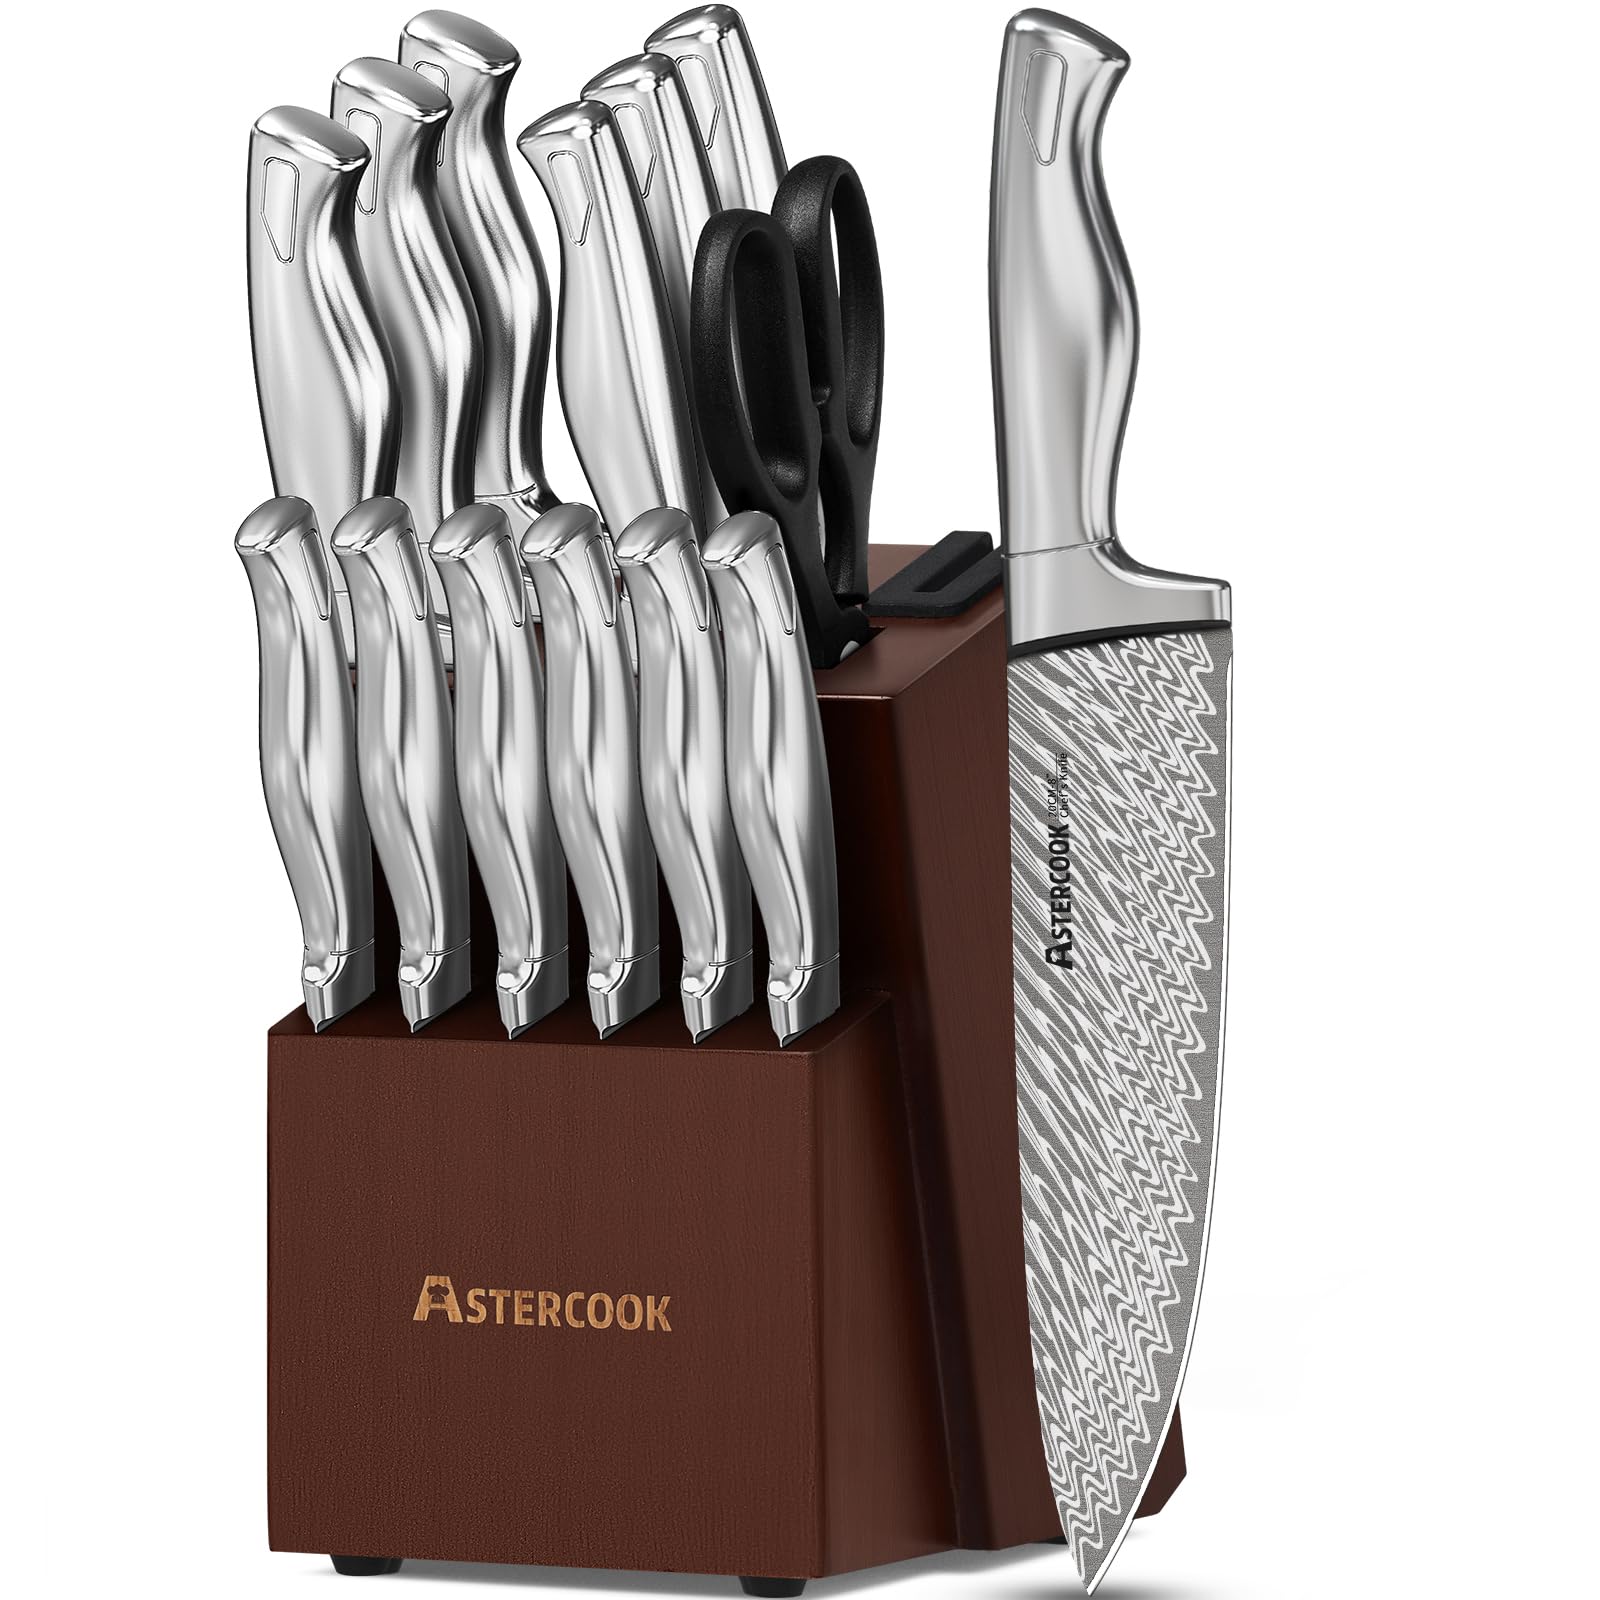 WIZEKA Kitchen Knife Set with Block, 15PCS Full Tang Professional Chef  Knife Set with Knife Sharpener, German Stainless Steel Knife Block Set,  Silver